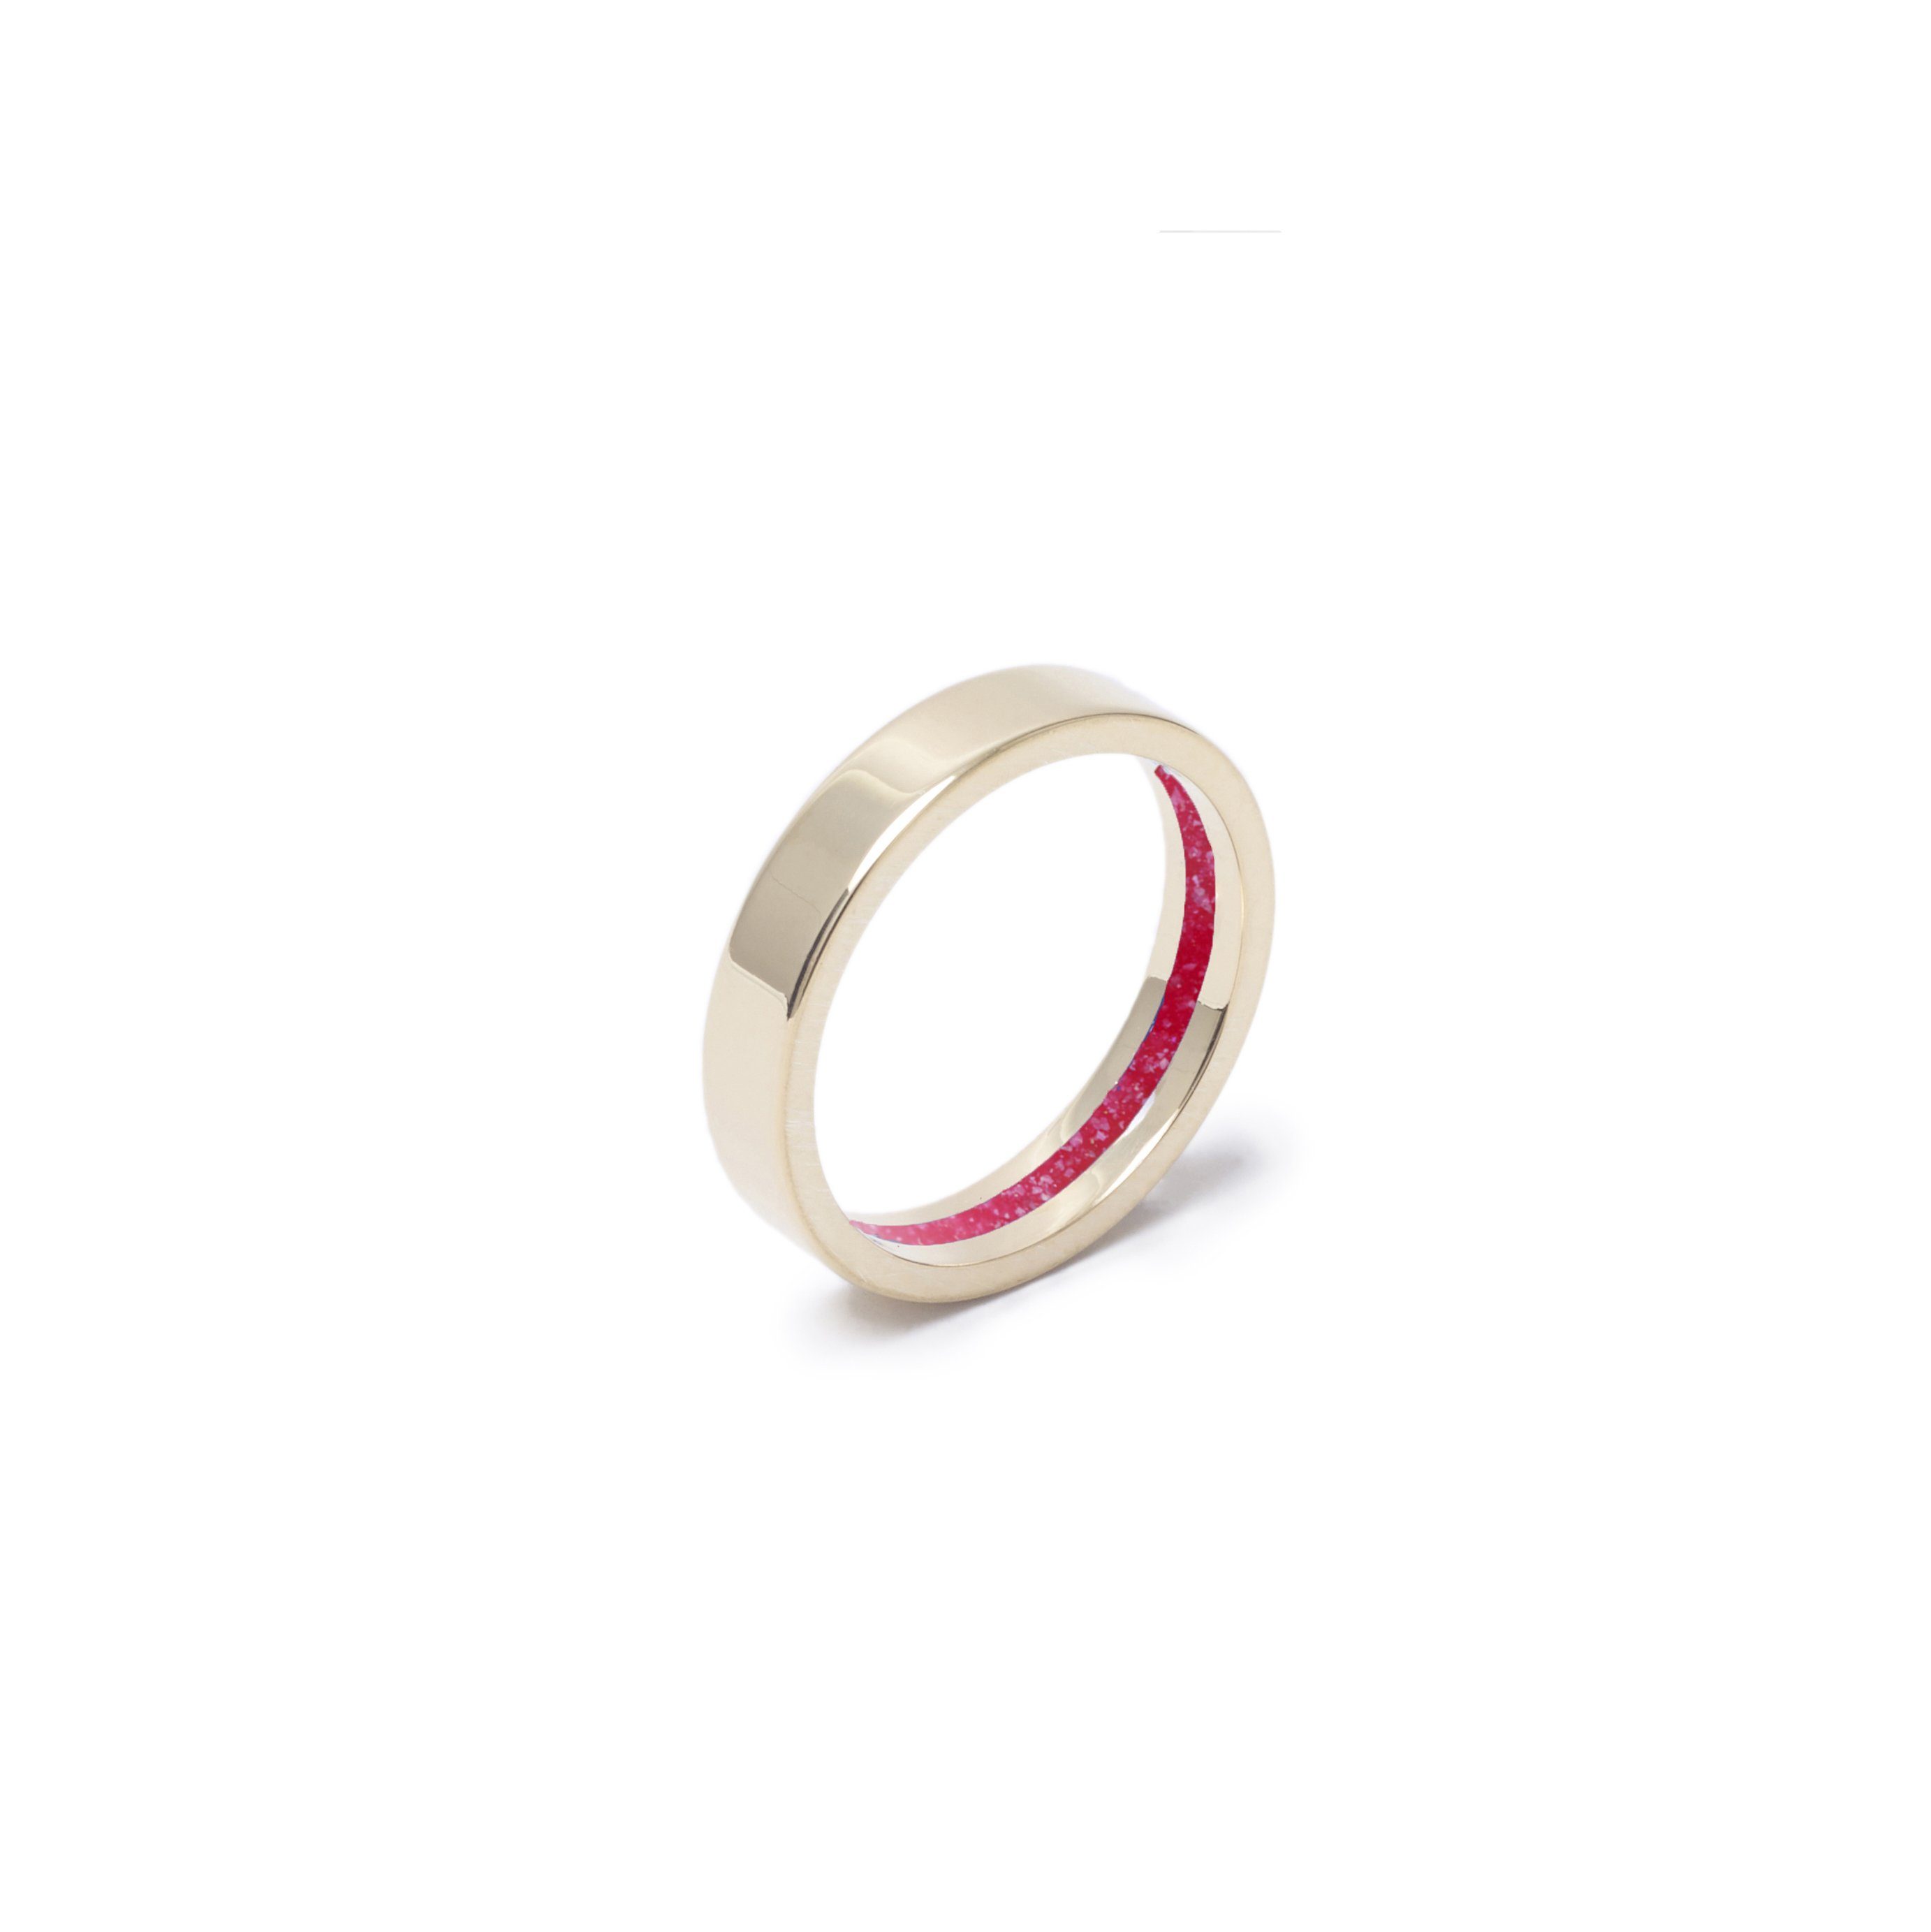 Everence Ring, 10k Yellow Gold everence.life 4mm Scarlet 